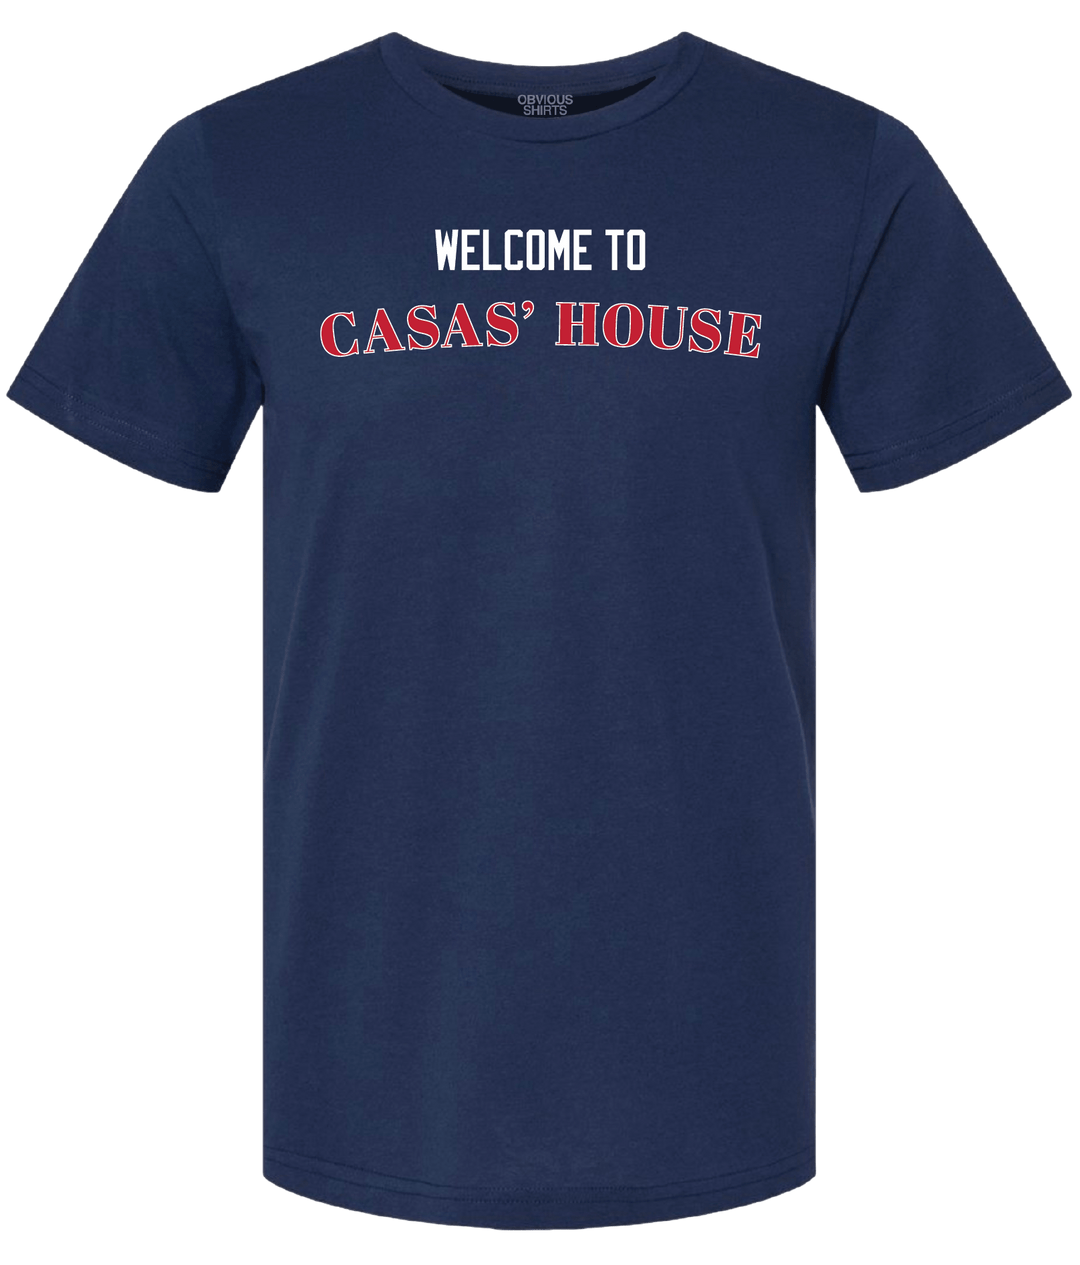 WELCOME TO CASAS' HOUSE. - OBVIOUS SHIRTS